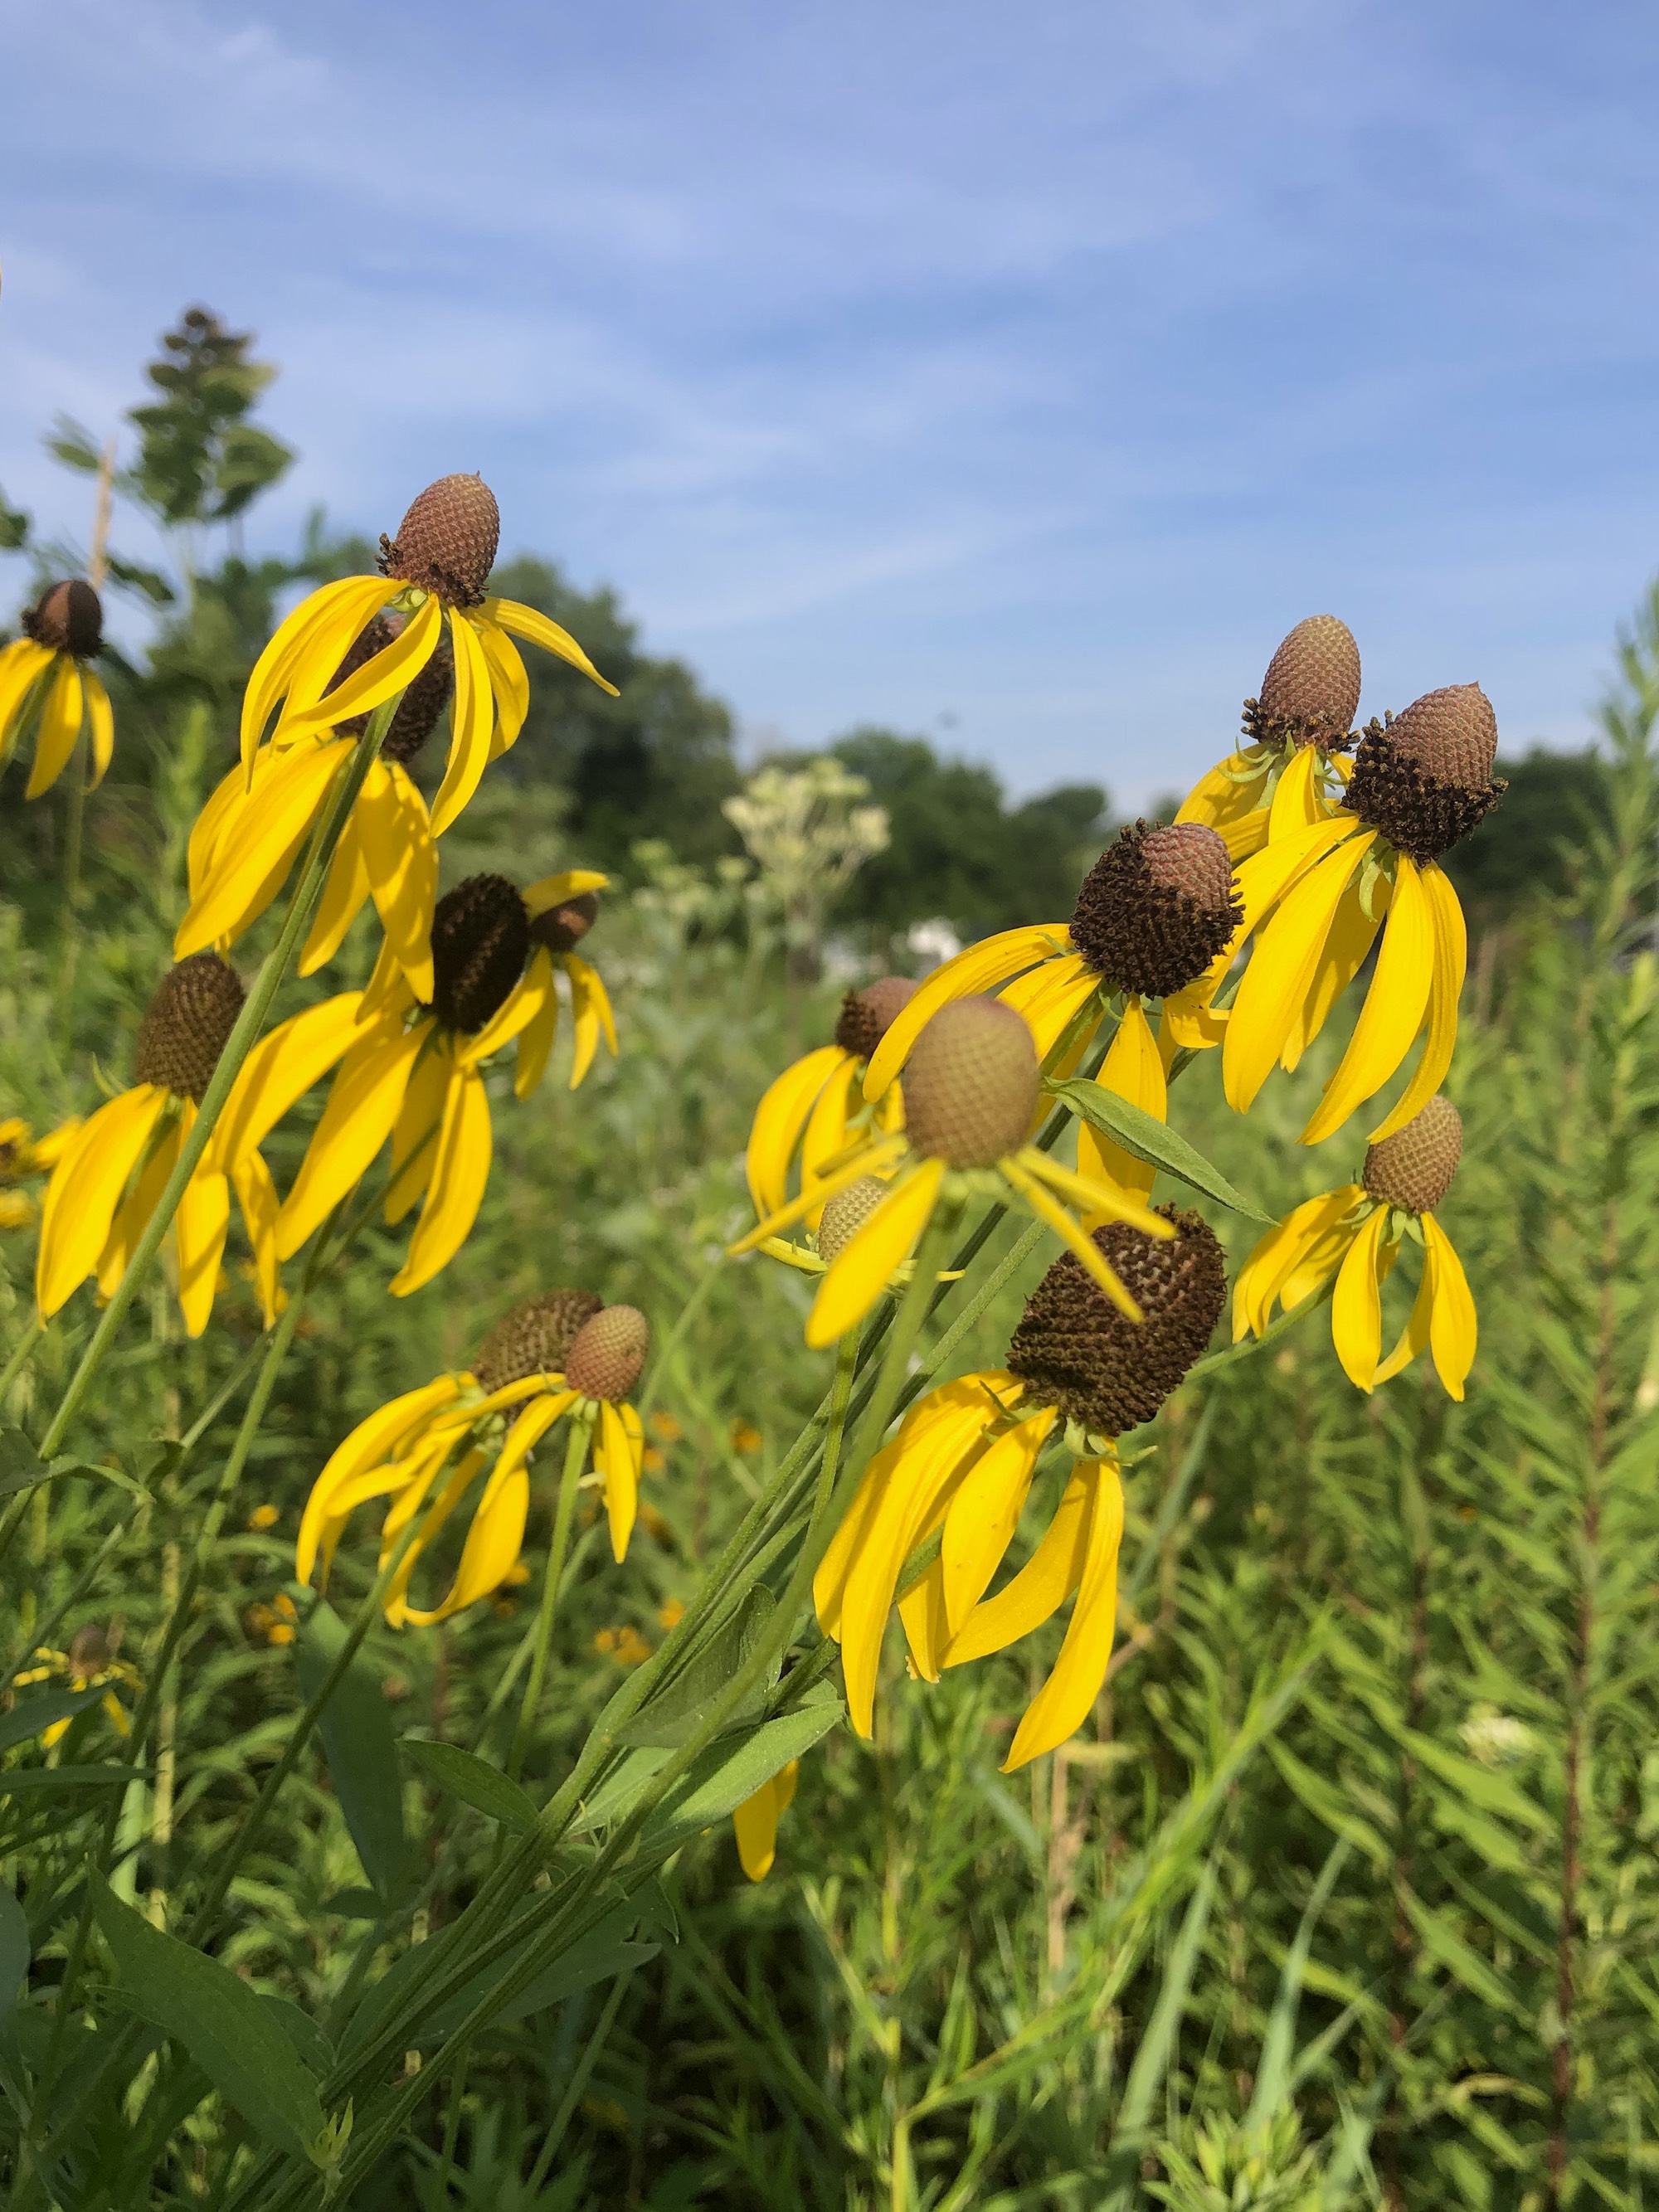 ray-headed coneflower on shore of Marion Dunn Pond in Madison, Wisconsin on July 26, 2020.